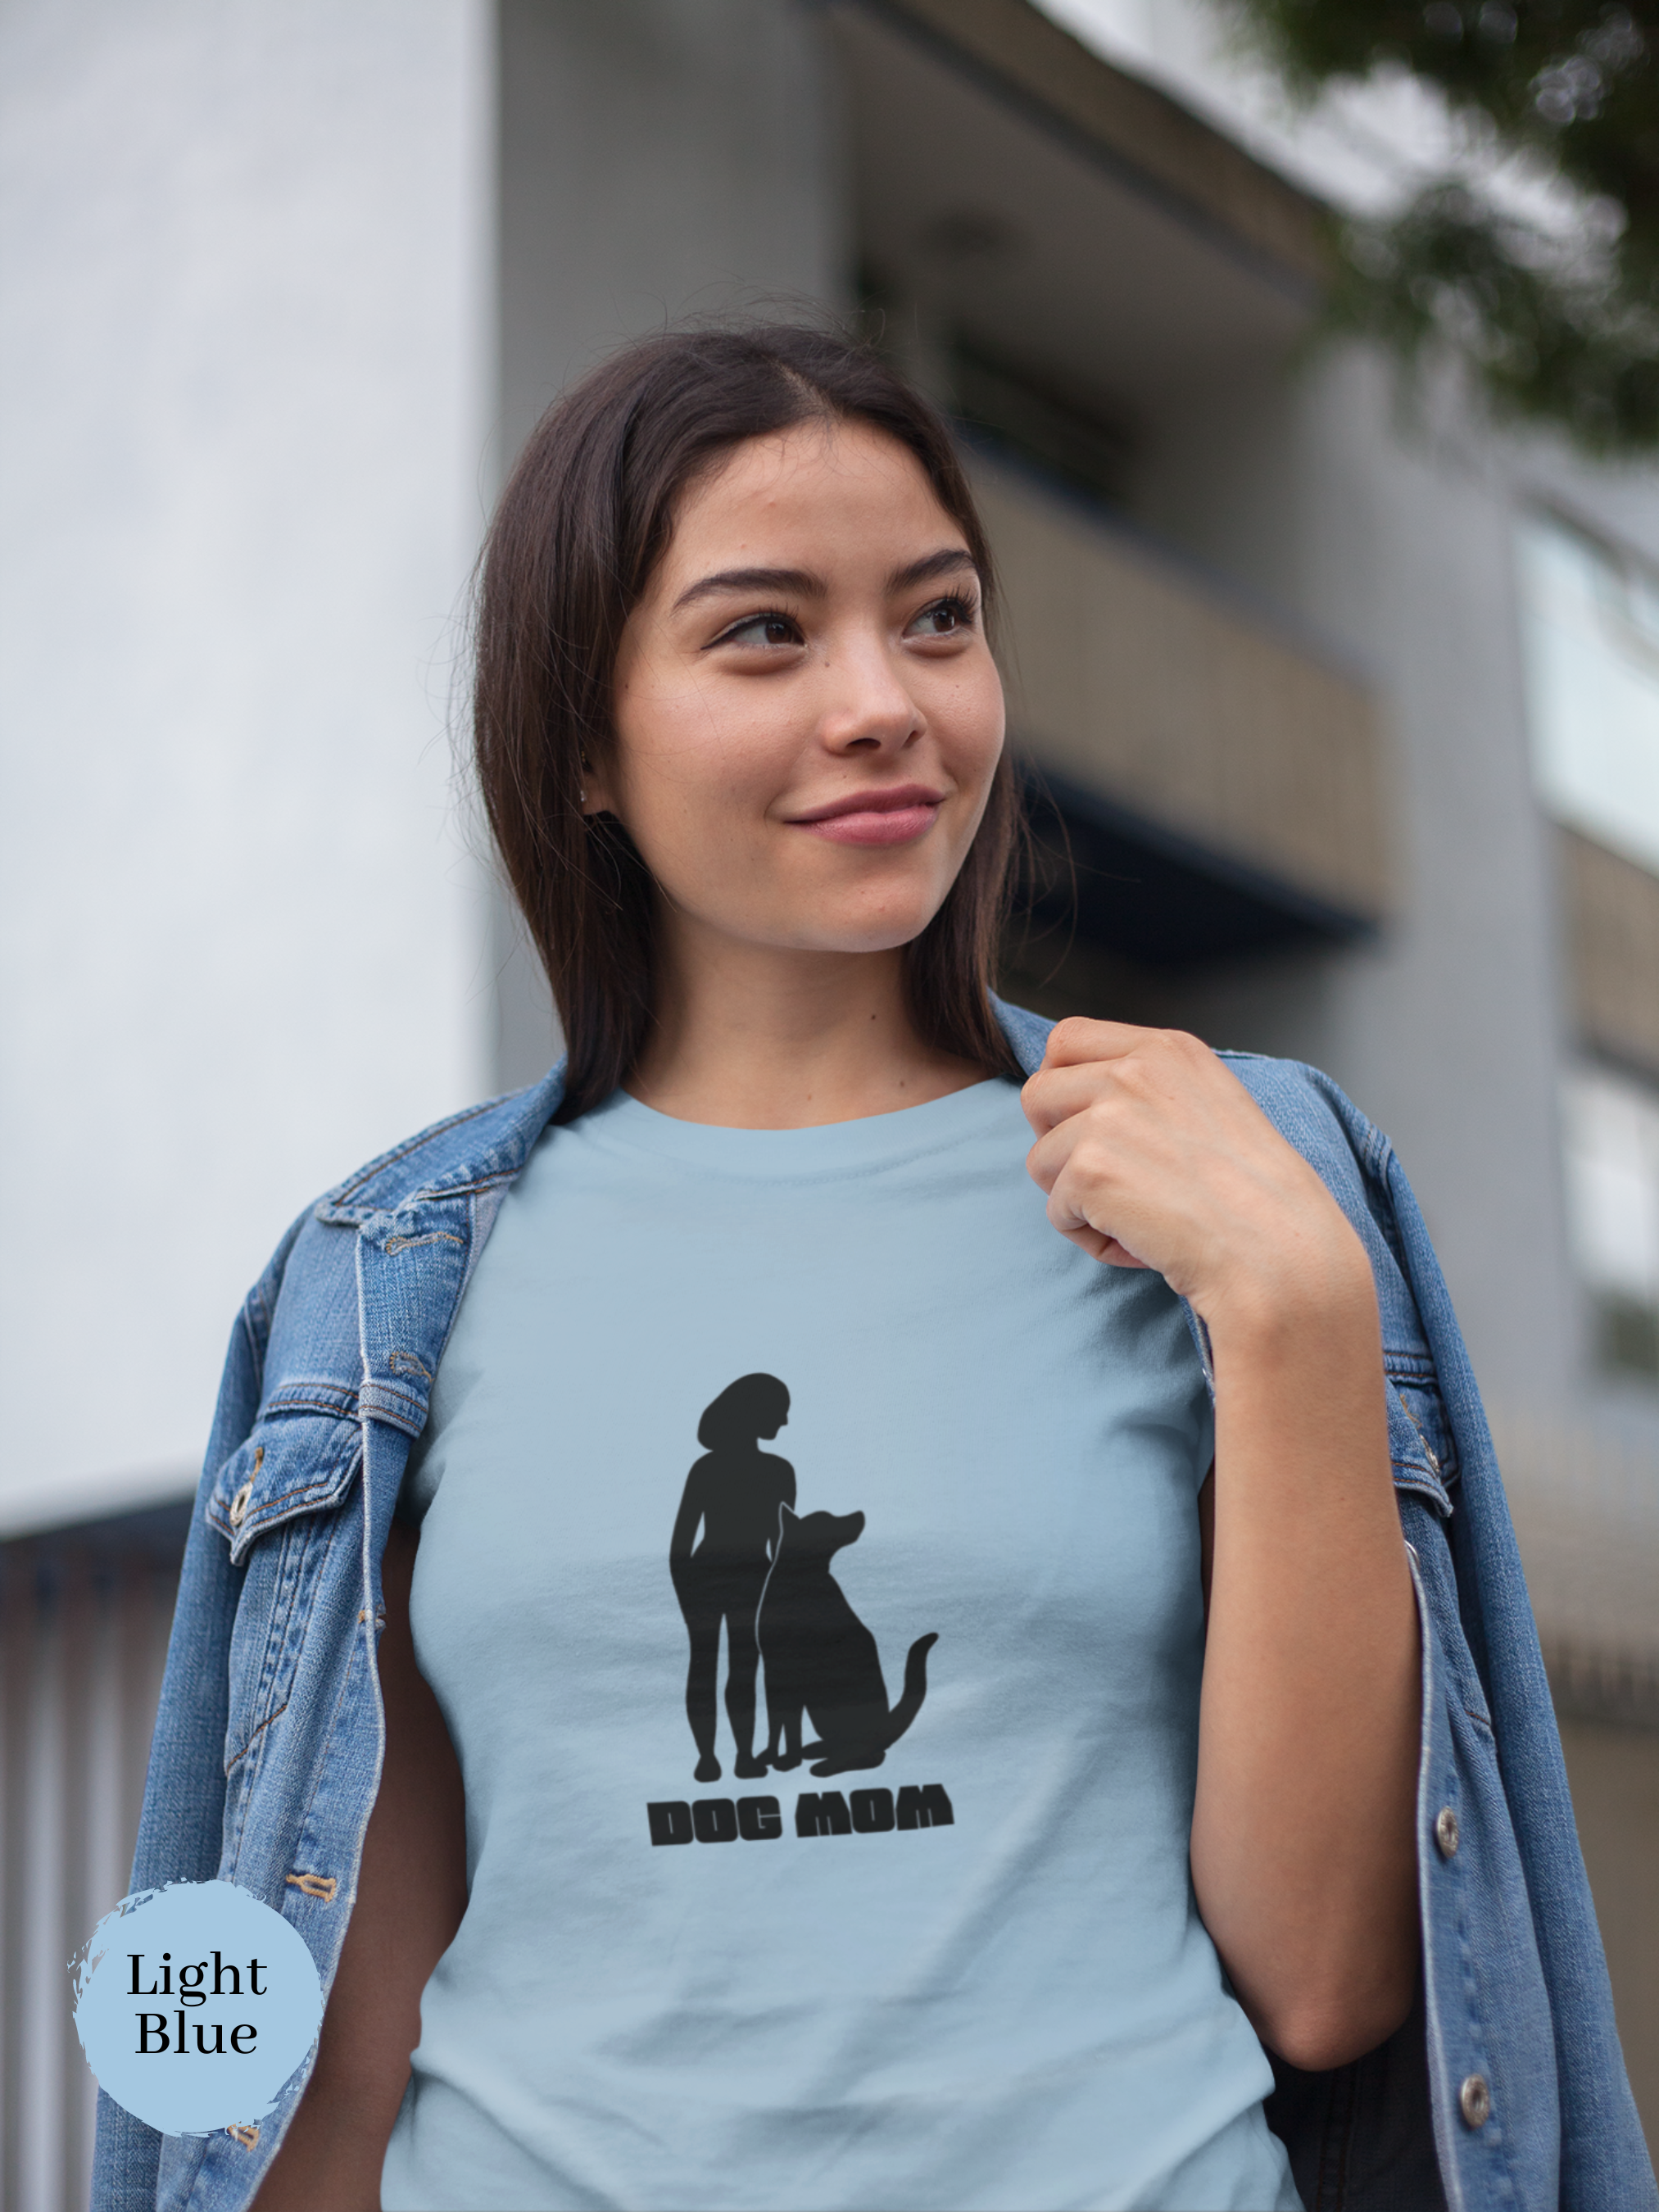 Dog Mom T-shirt: Cute Dog Lover Shirt for Pet Moms, Funny Dog Mom Life Apparel and Gift